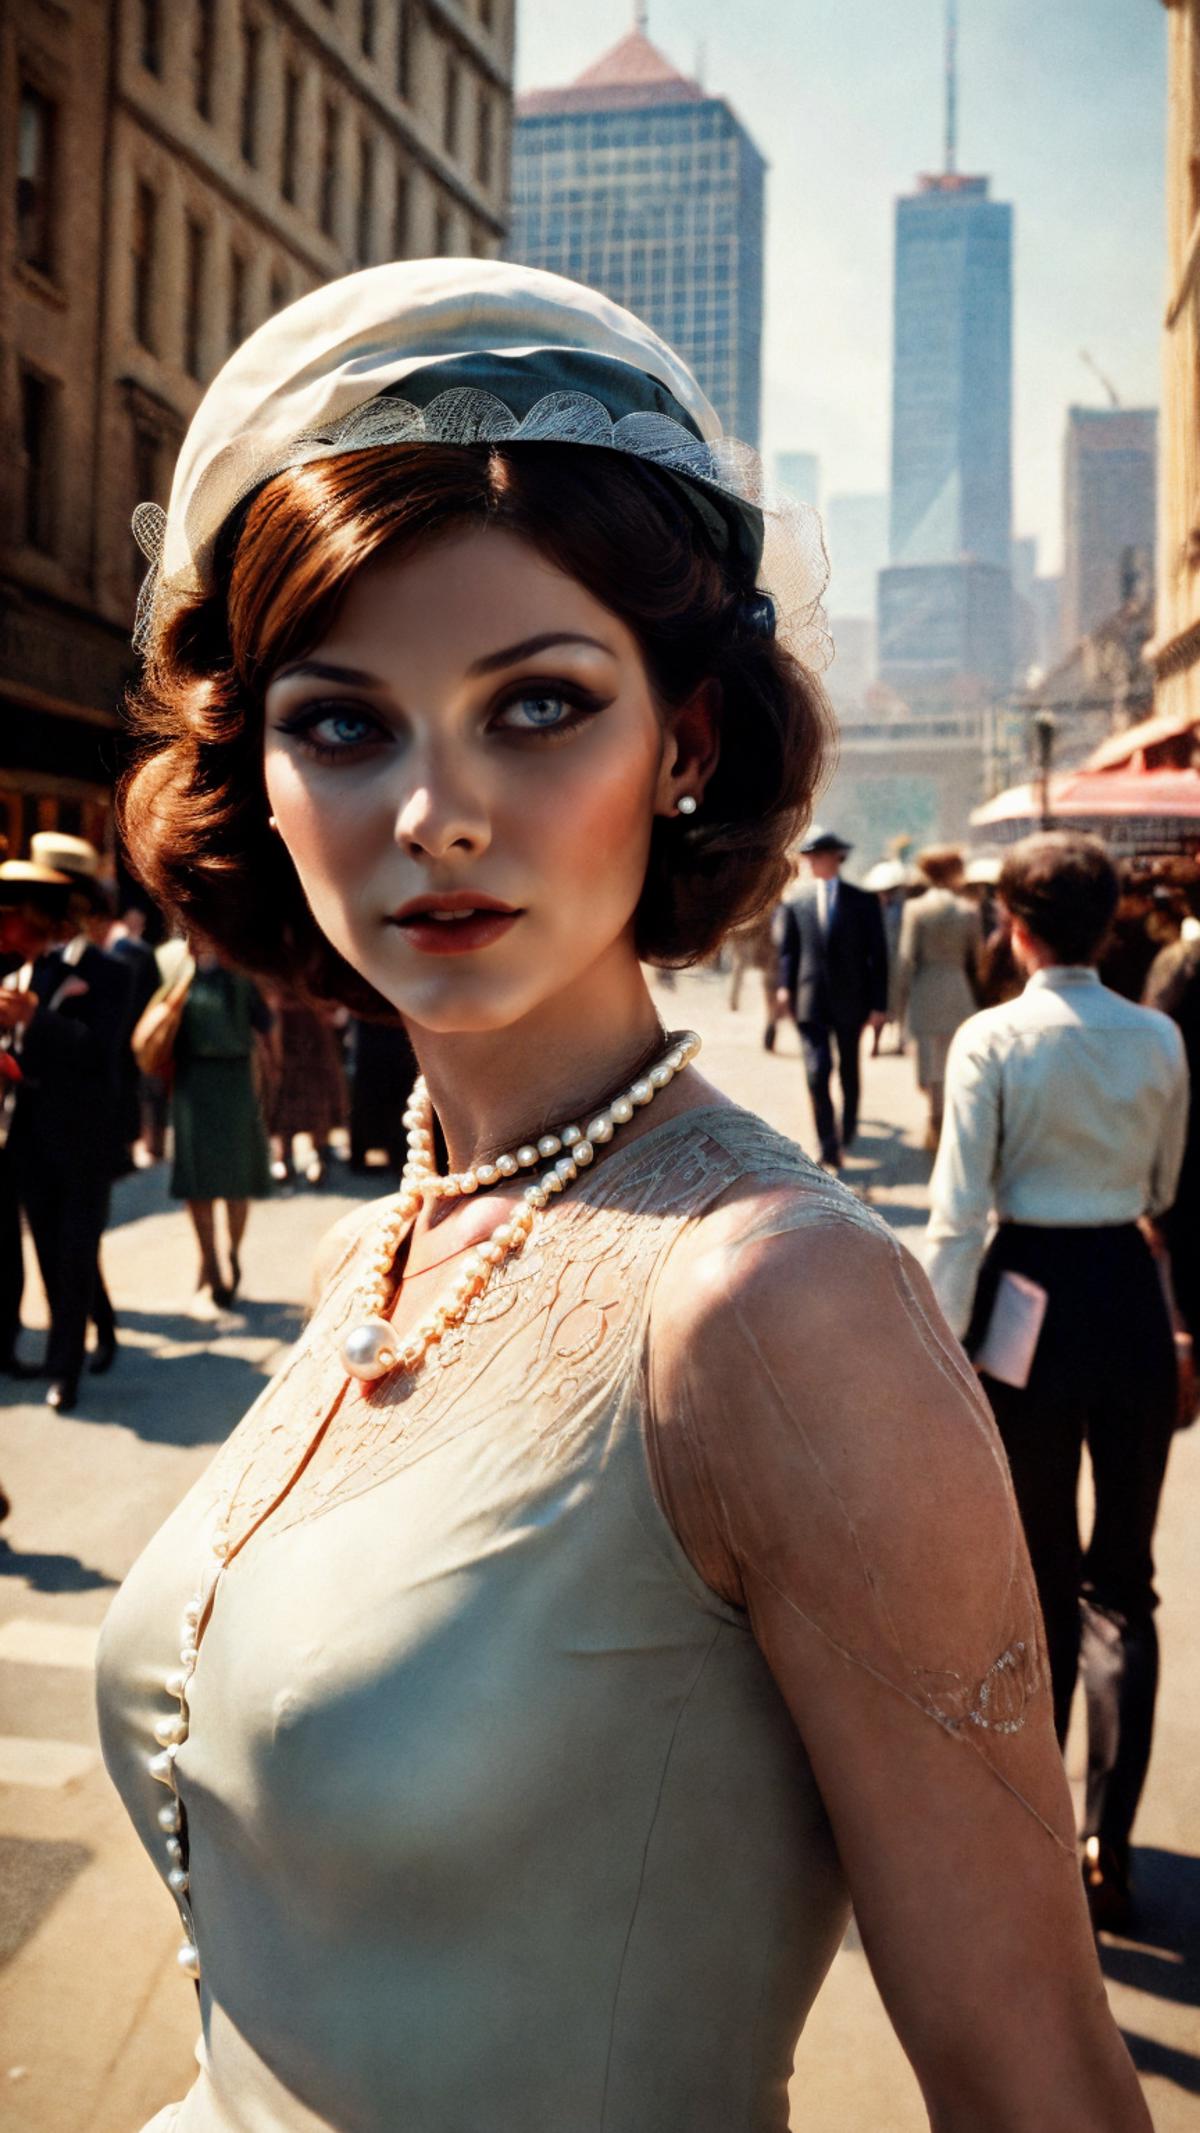 A woman wearing a pearl necklace and a hat walking down the street.